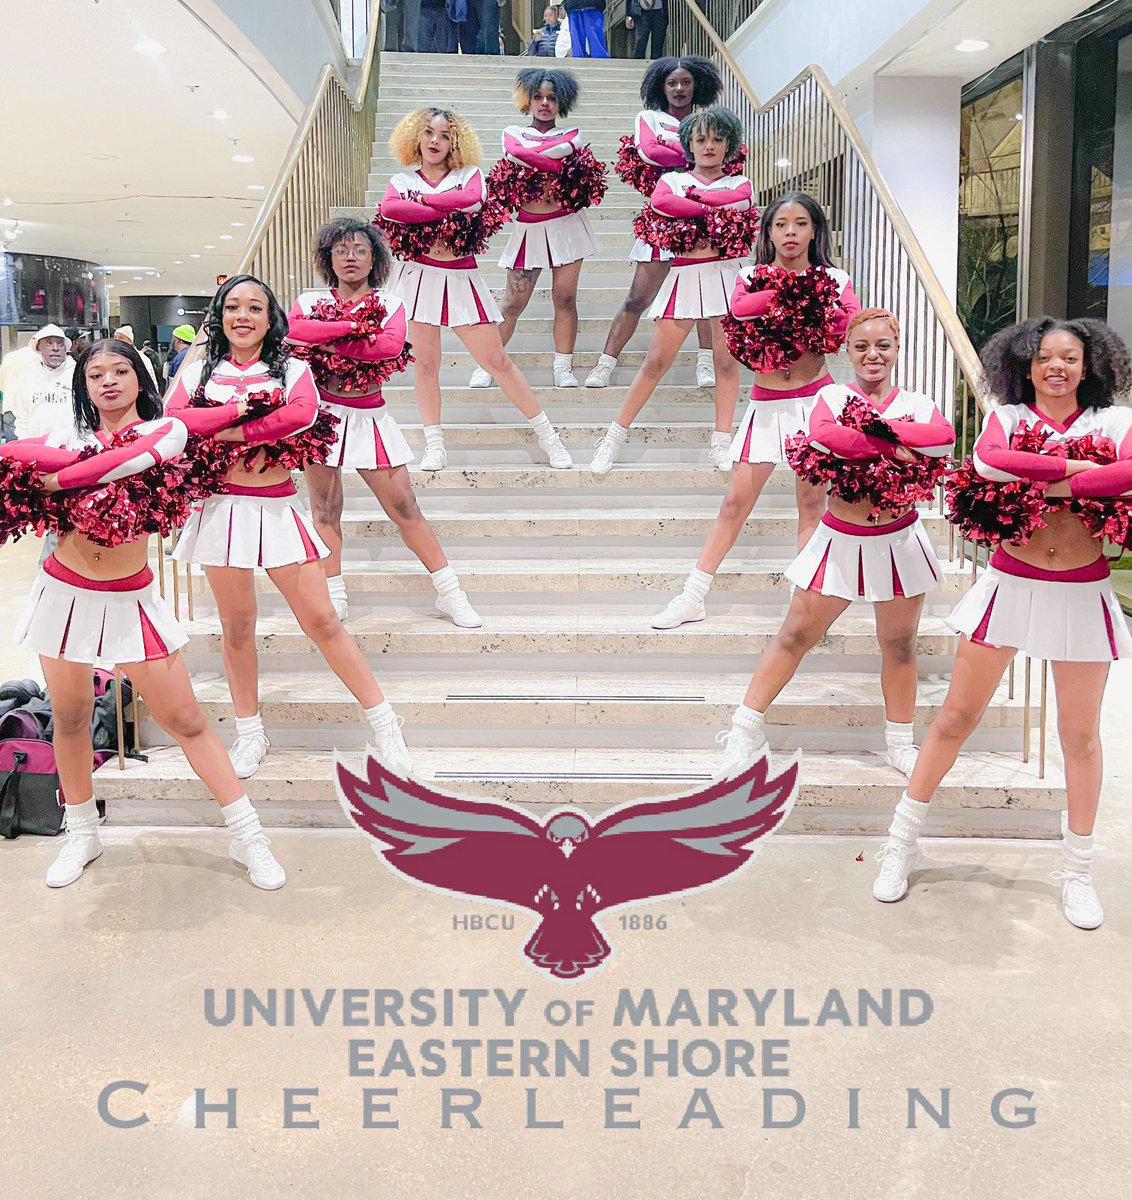 A great season for the Hawks! See you next year, Meac! Shout out to all the support this week of the president, AD, administration, students and alumni!!! The #hawkpride was real in the streets of Norfolk! 
#hbcheerleaders #stompnshakecheer #flygurlz #MEAC #MEACPride #RYSUMES